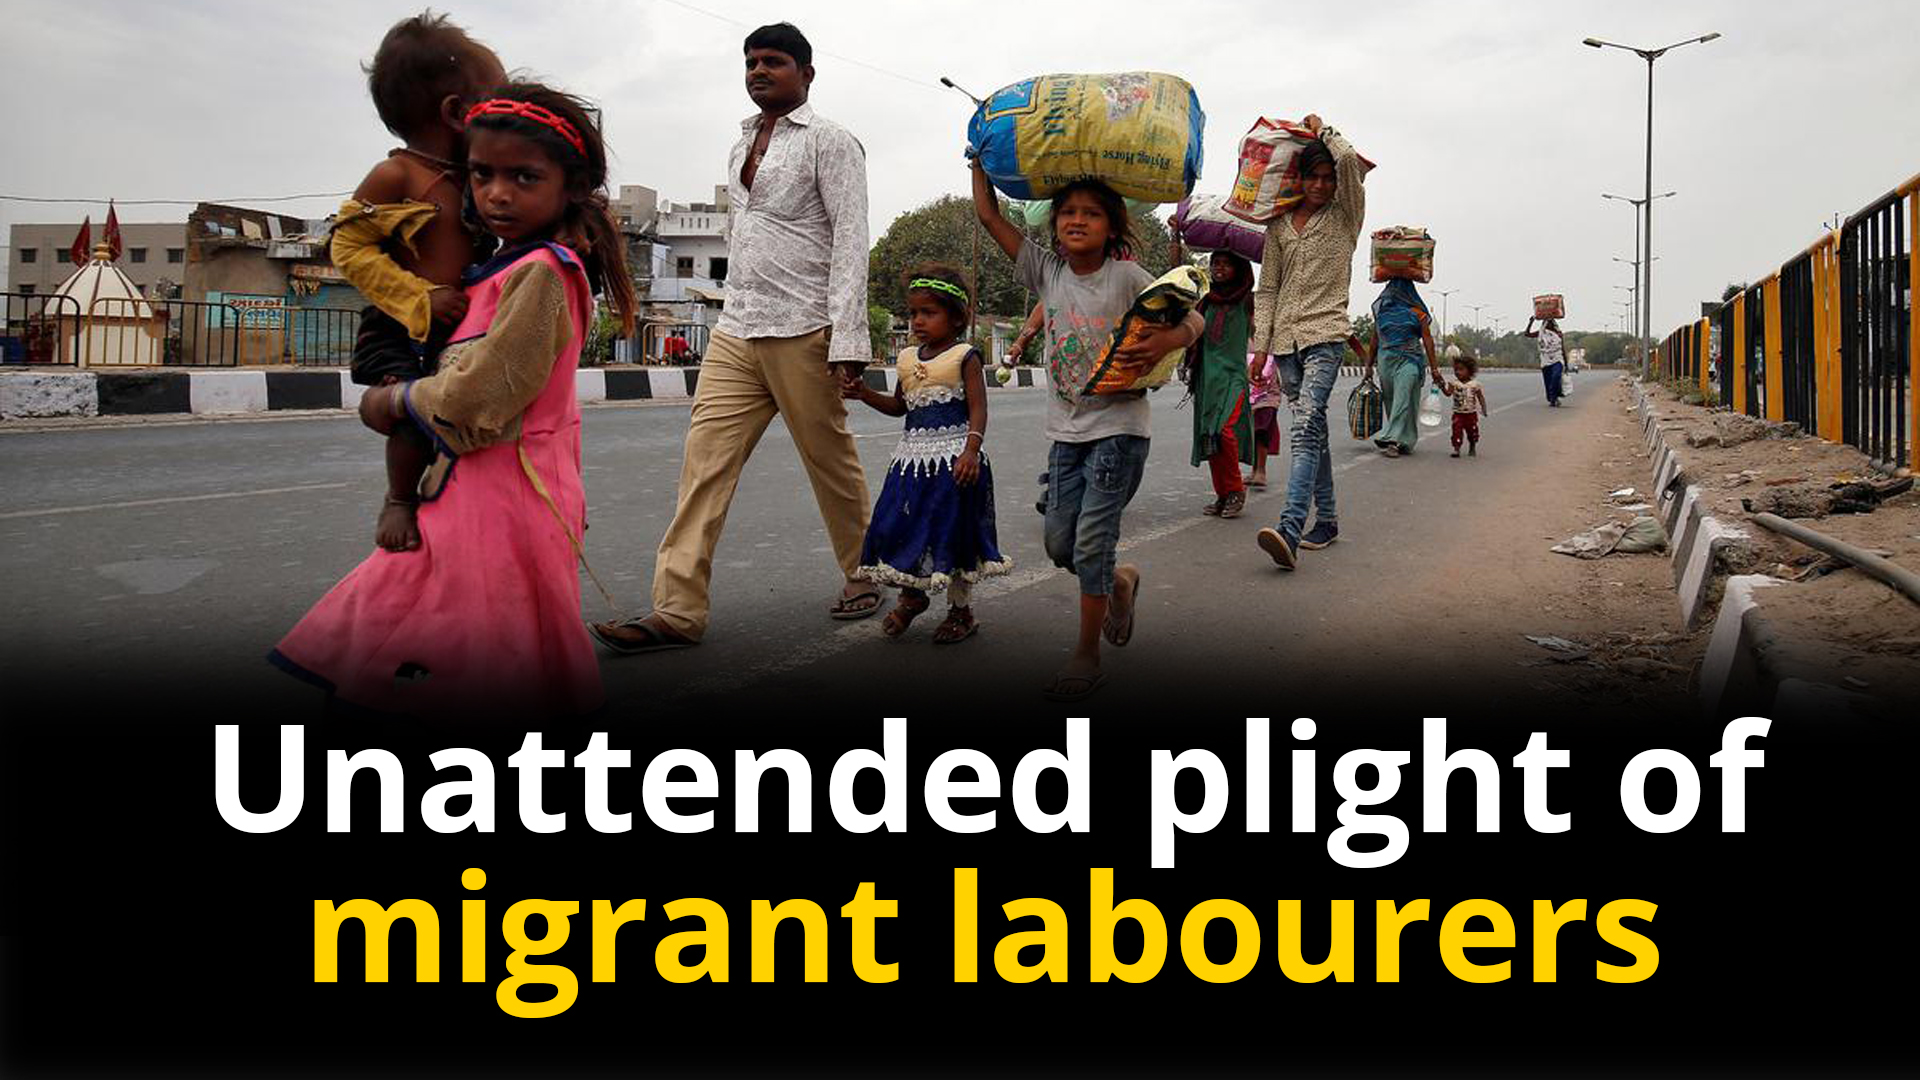 Unattended plight of migrant labourers